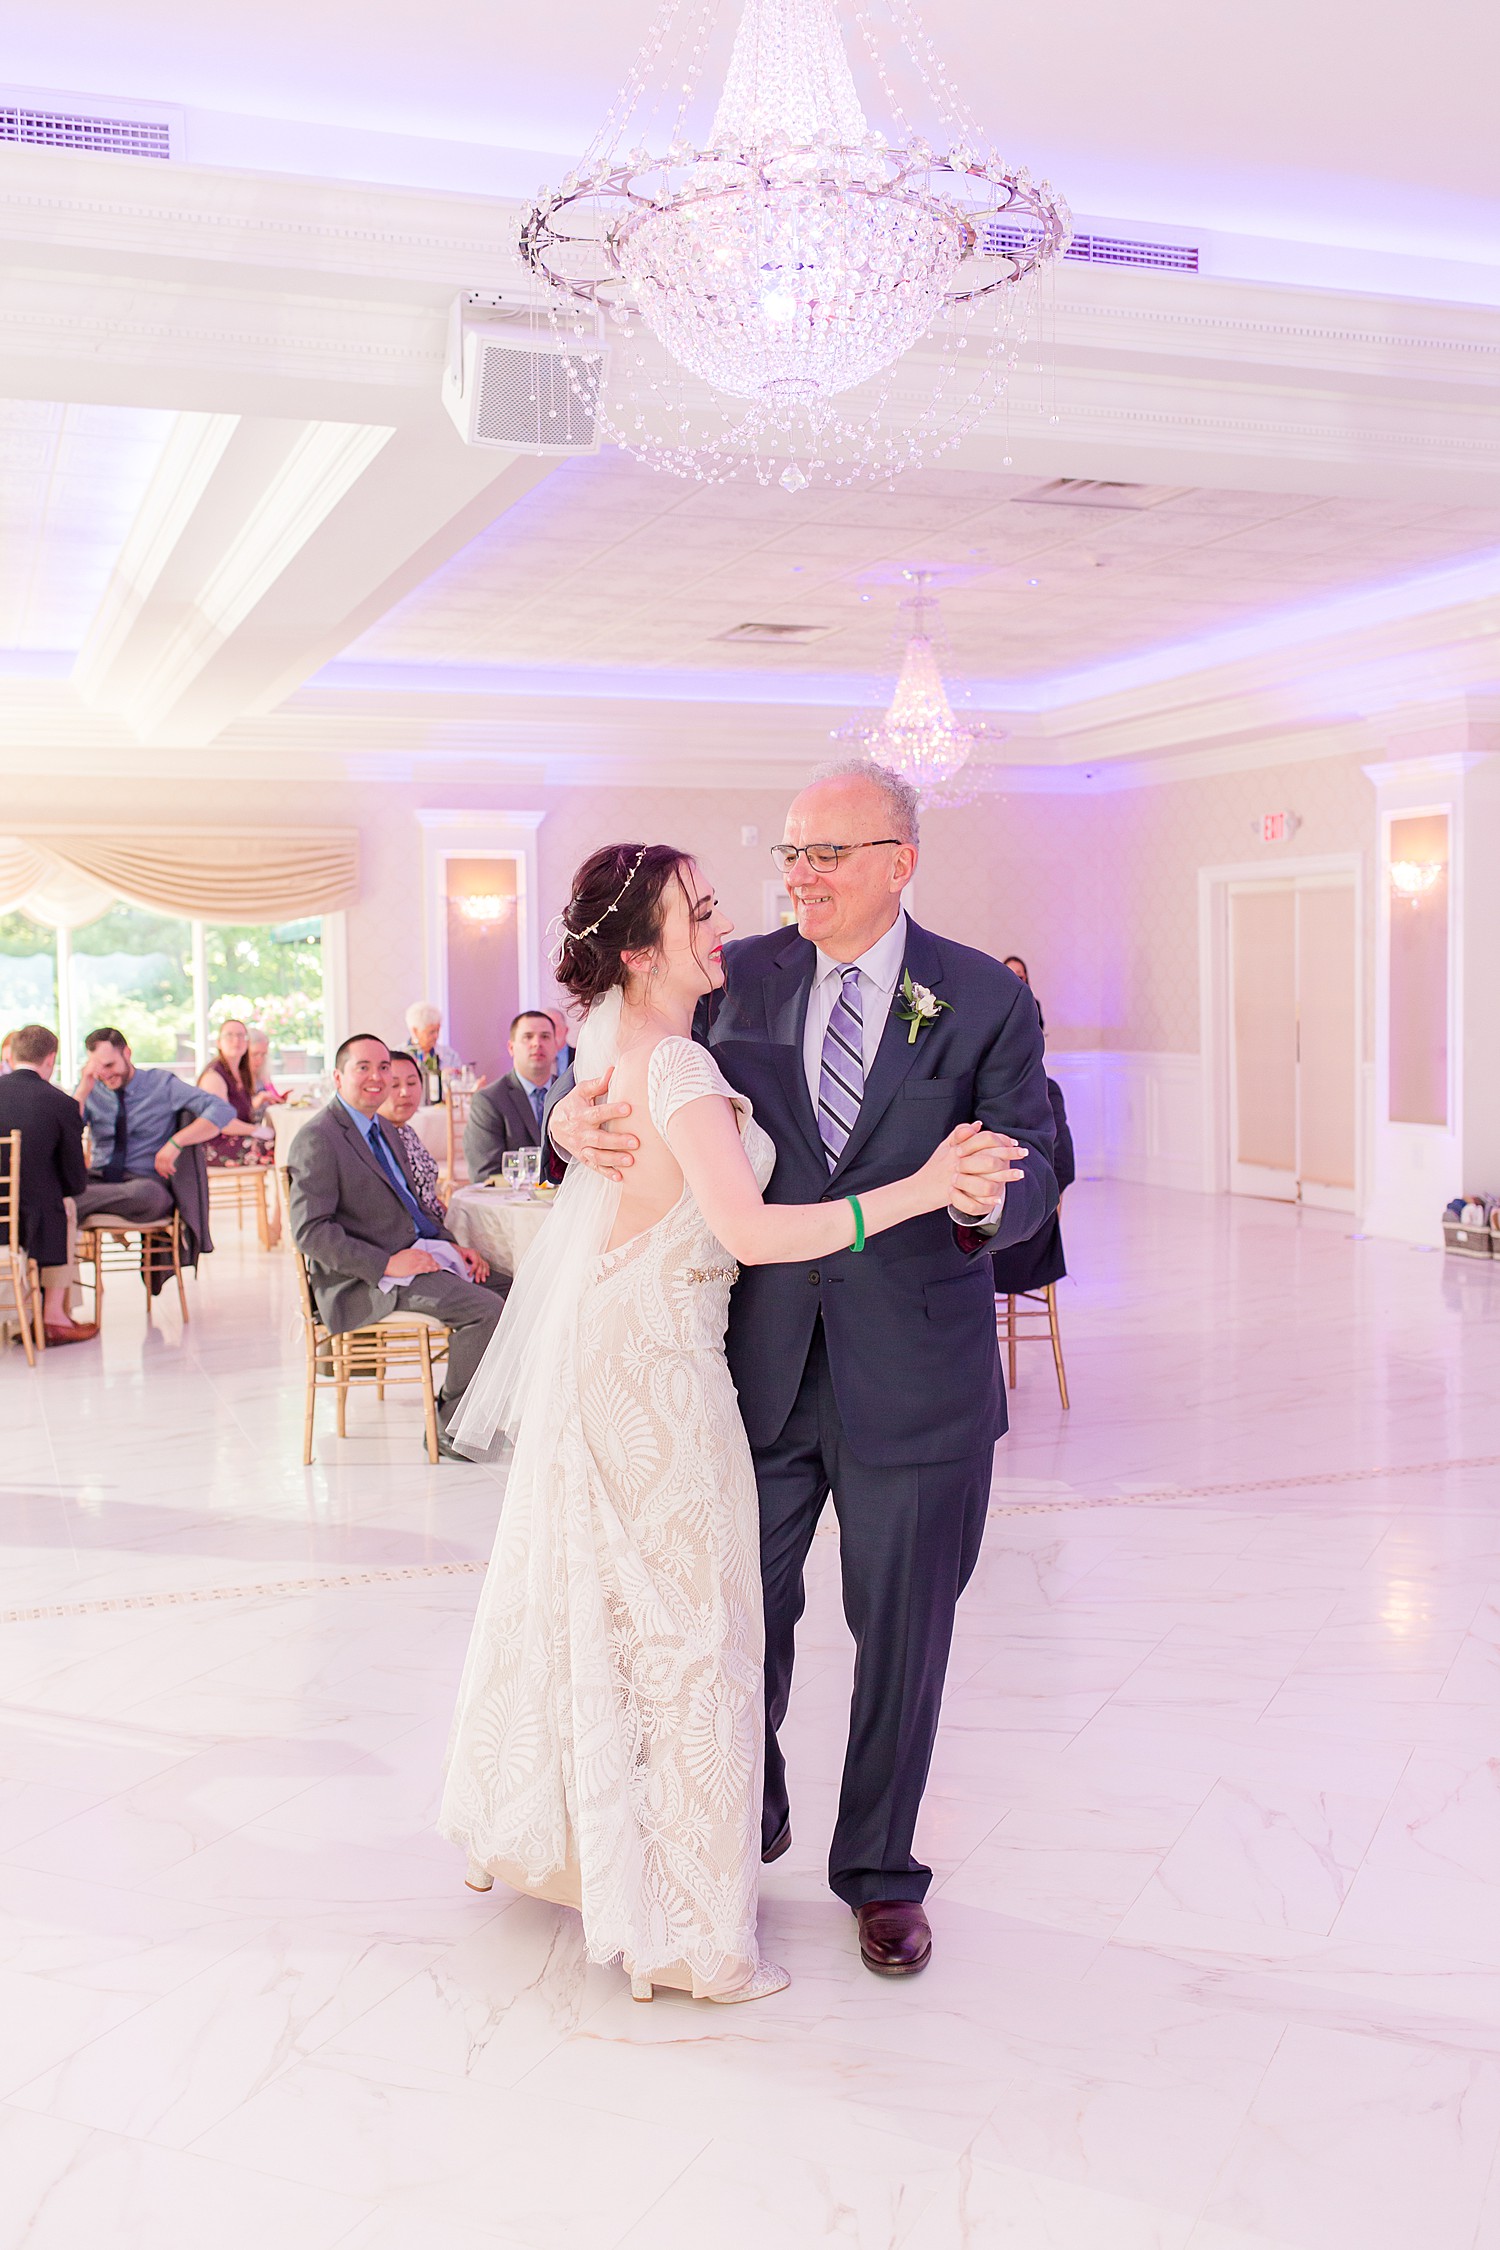 daddy-daughter dance during reception